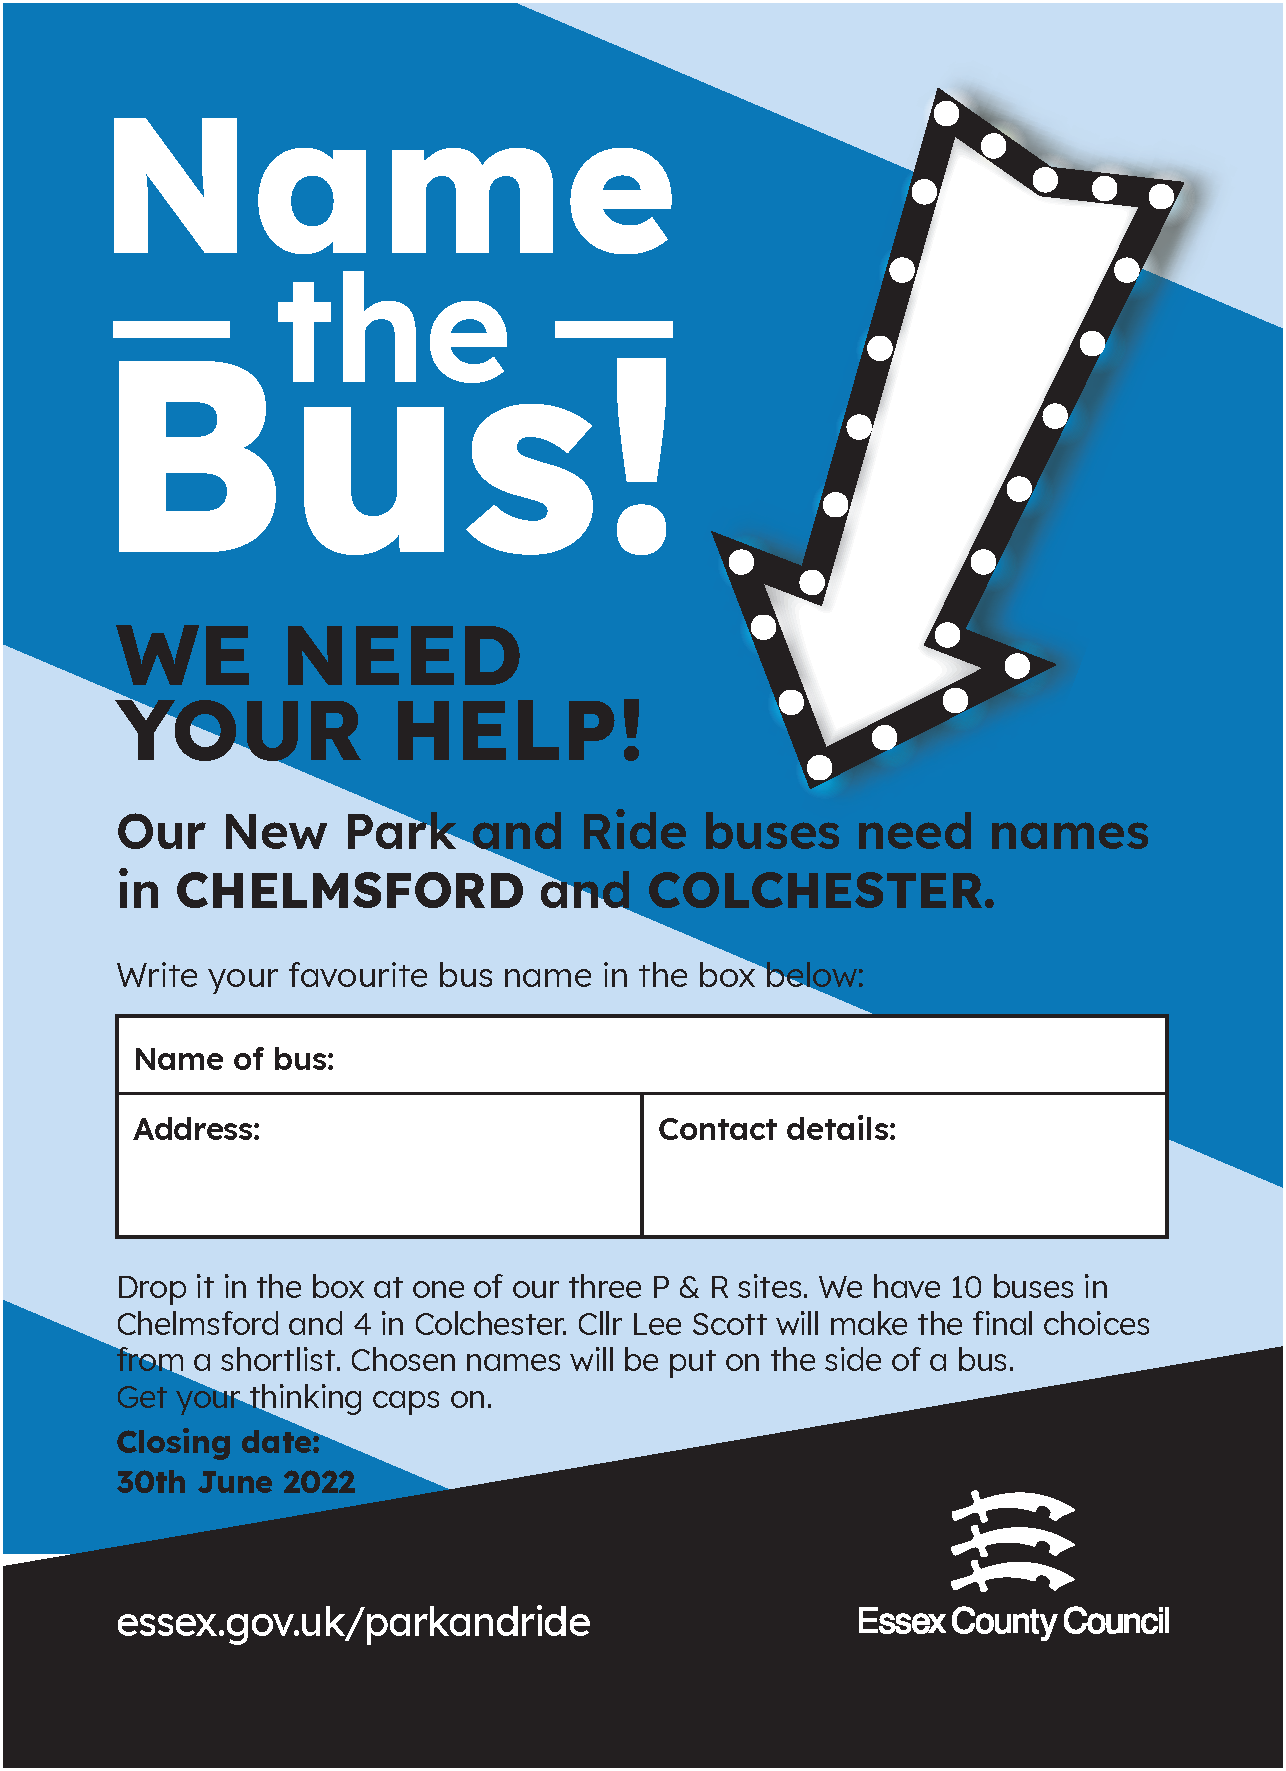 We need your help to name the Park and Ride buses!